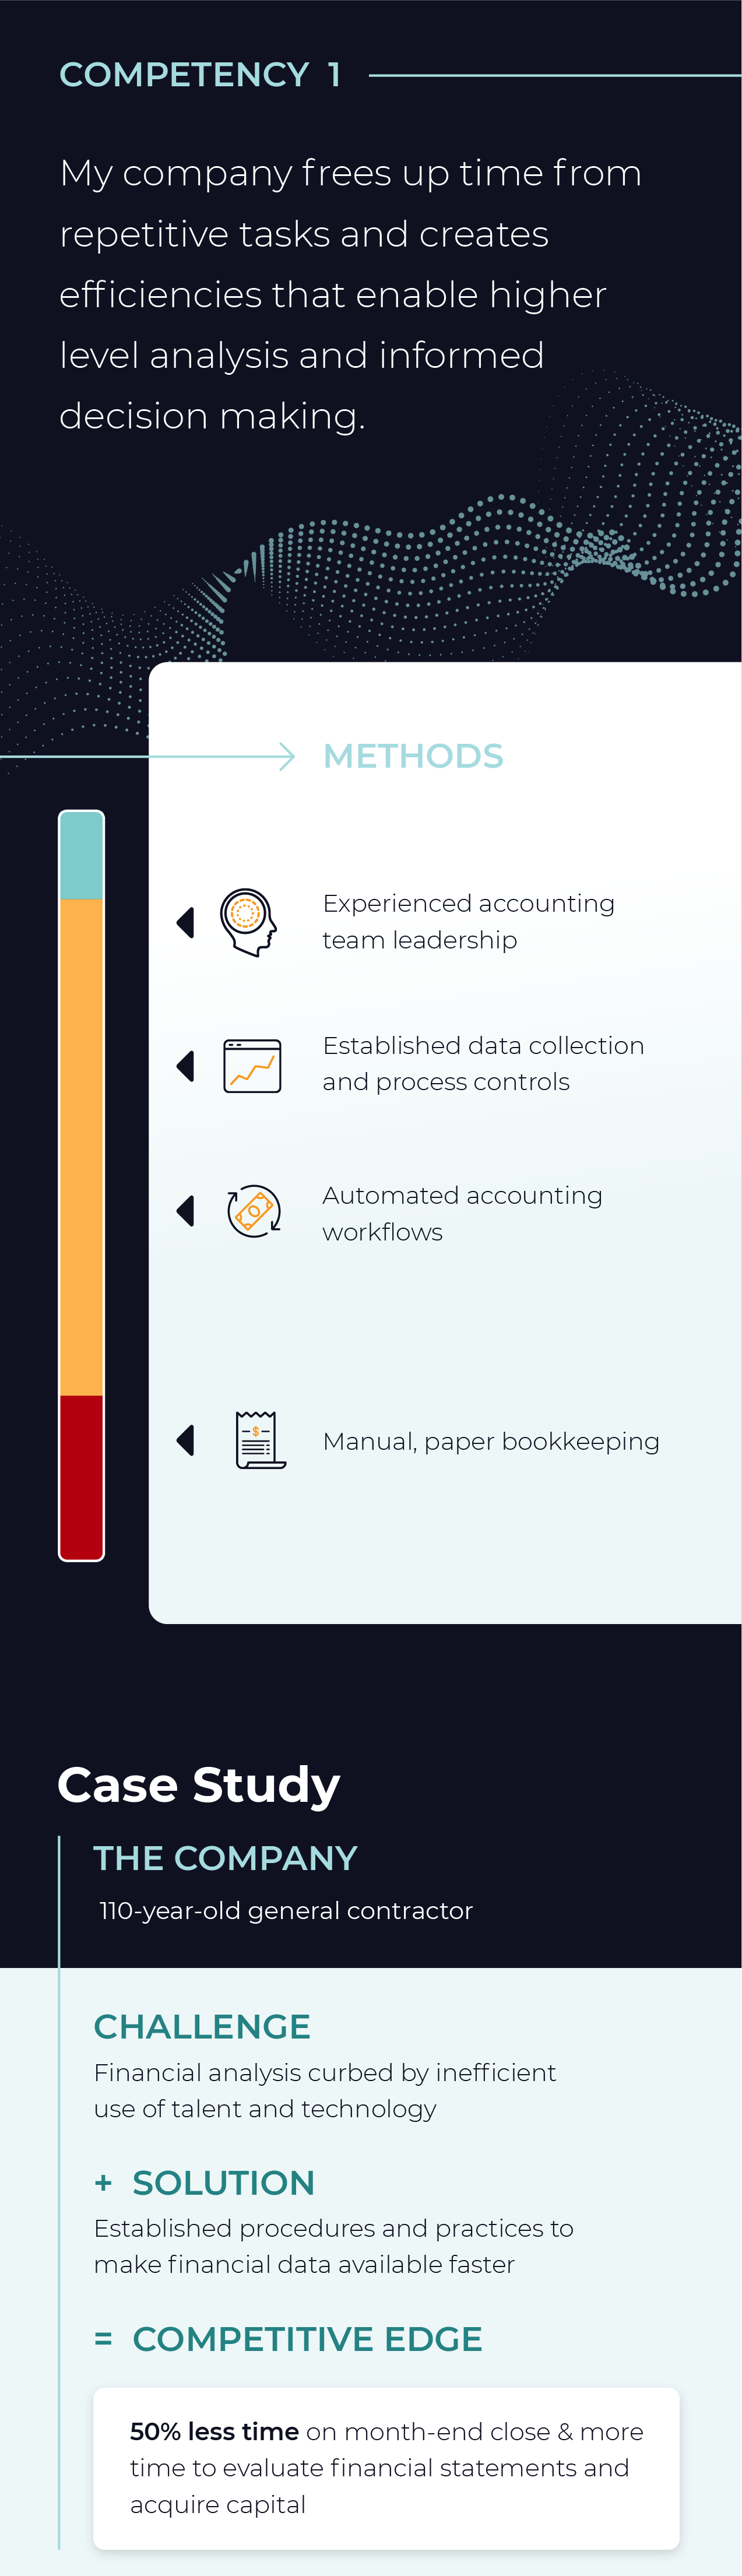 Data-driven business and accounting workflow